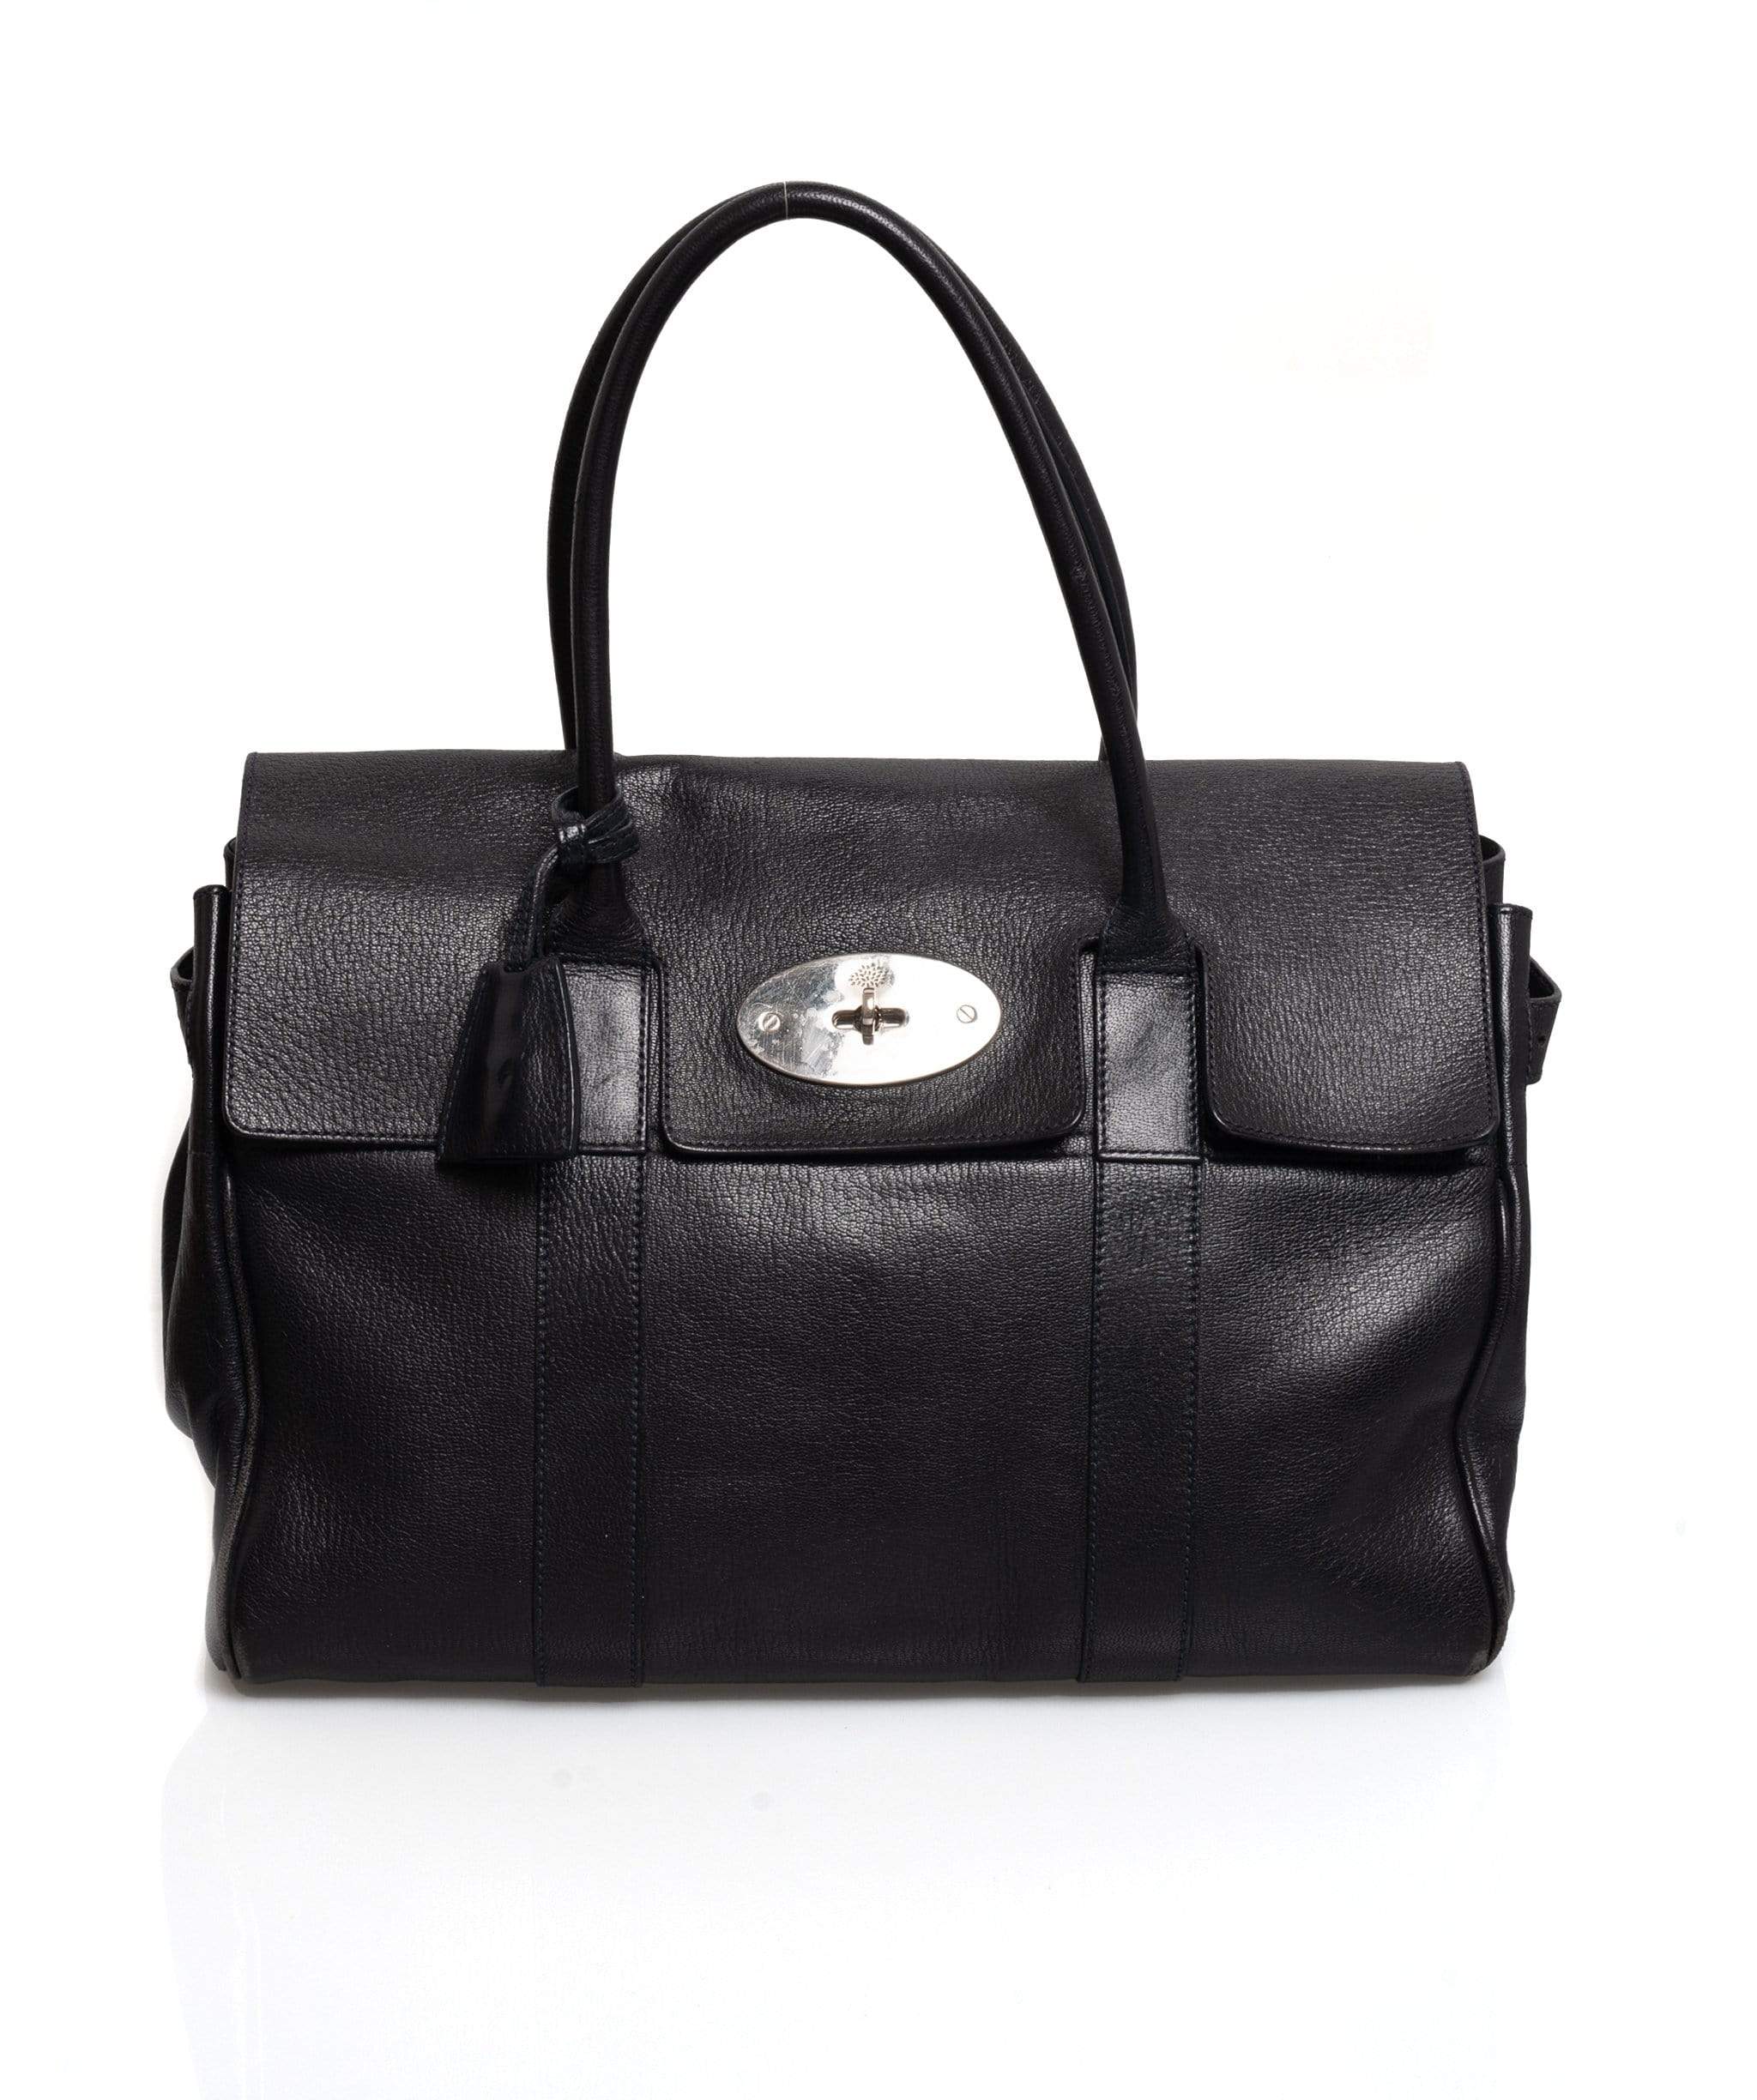 Mulberry Mulberry Bayswater Black Bag - ADL1415